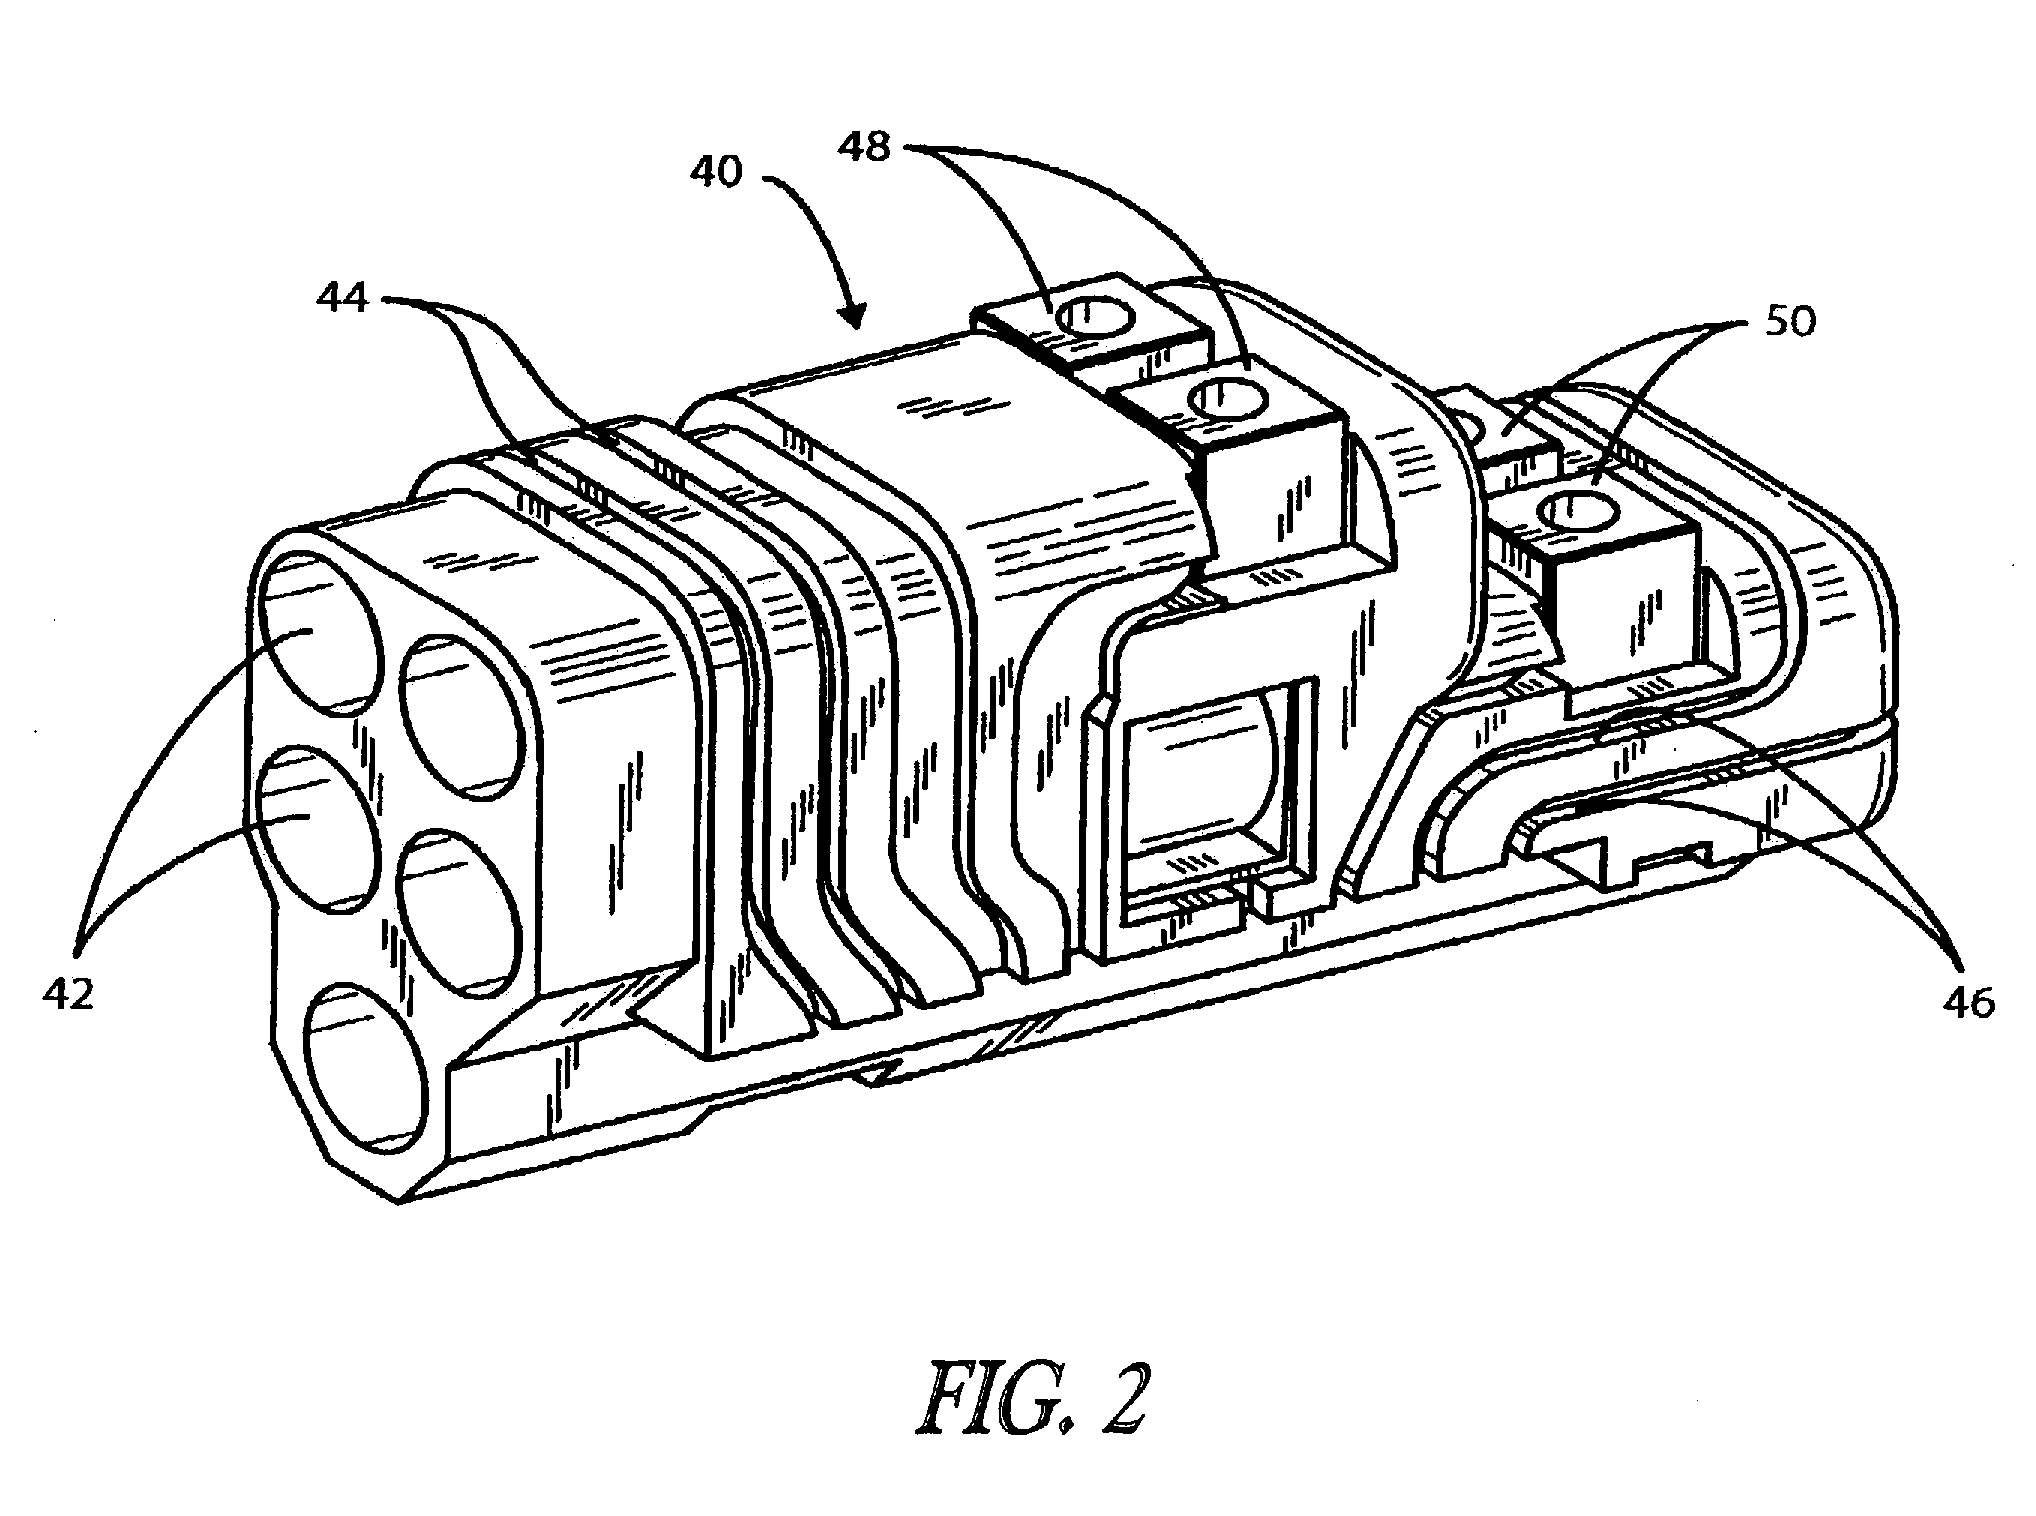 Interconnect for implantable medical device header